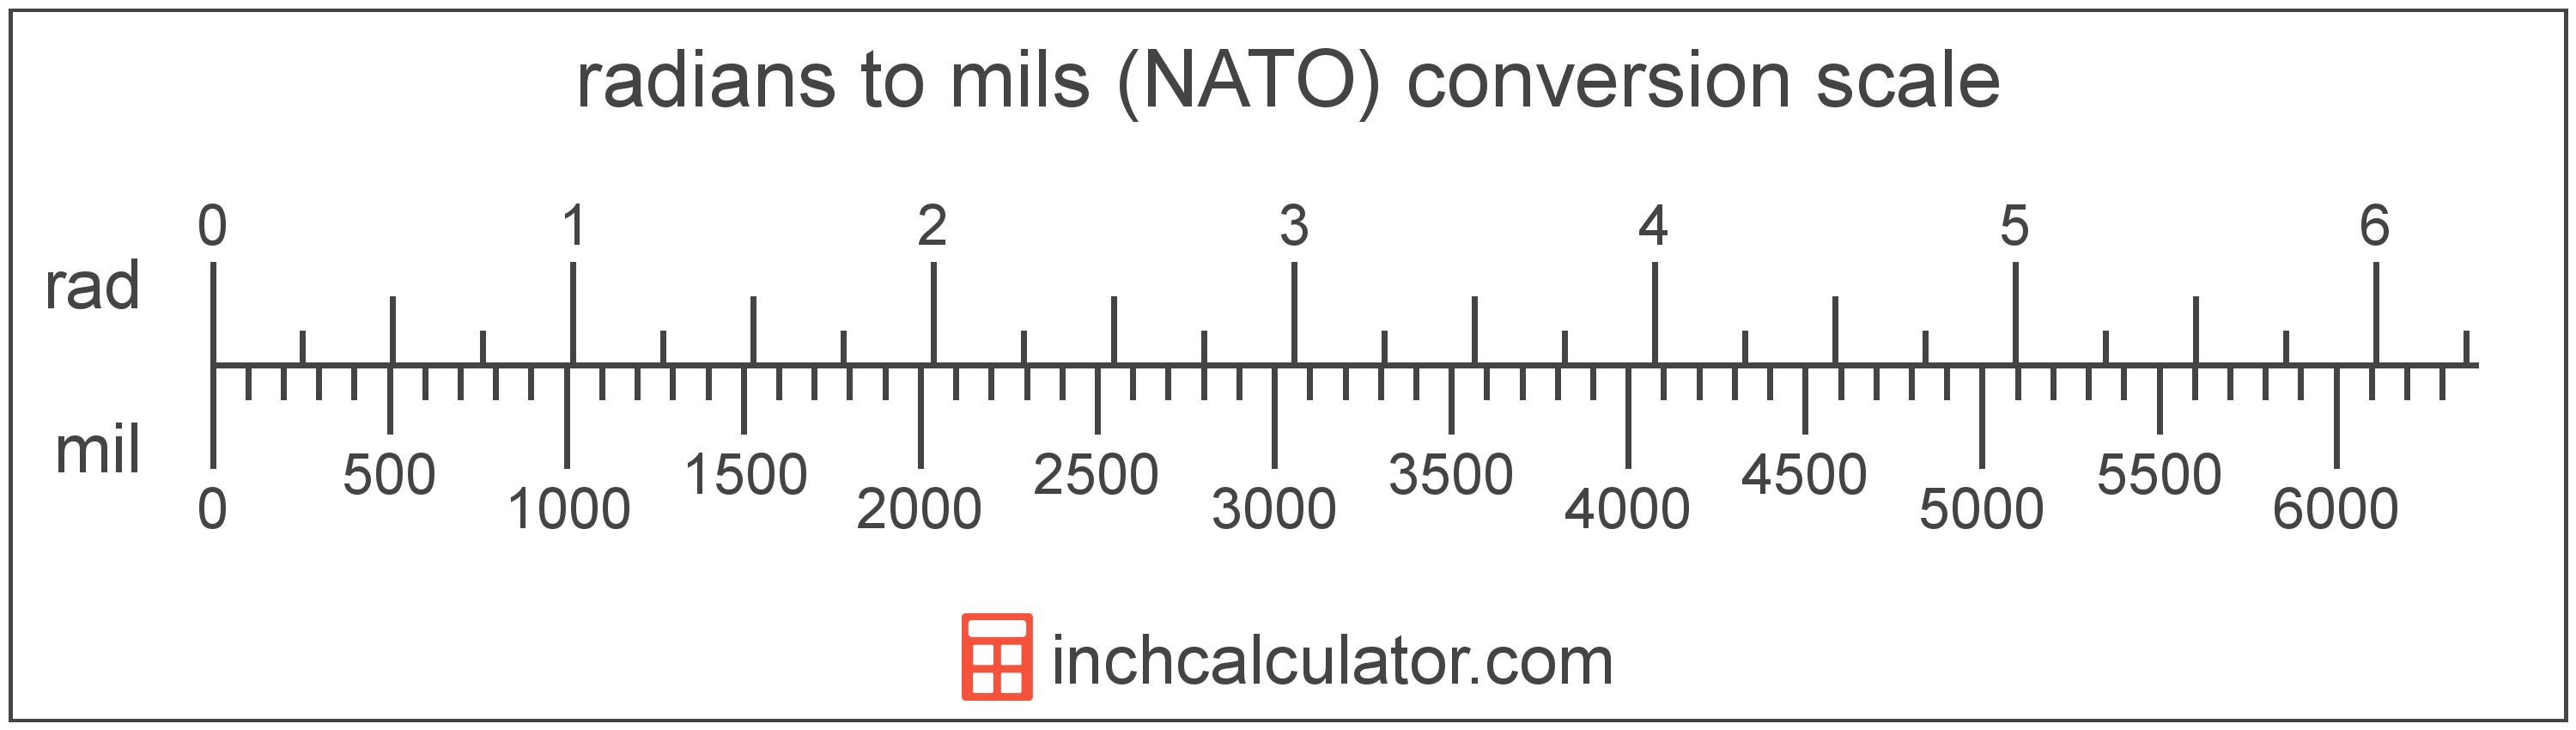 conversion scale showing mils and equivalent radians angle values